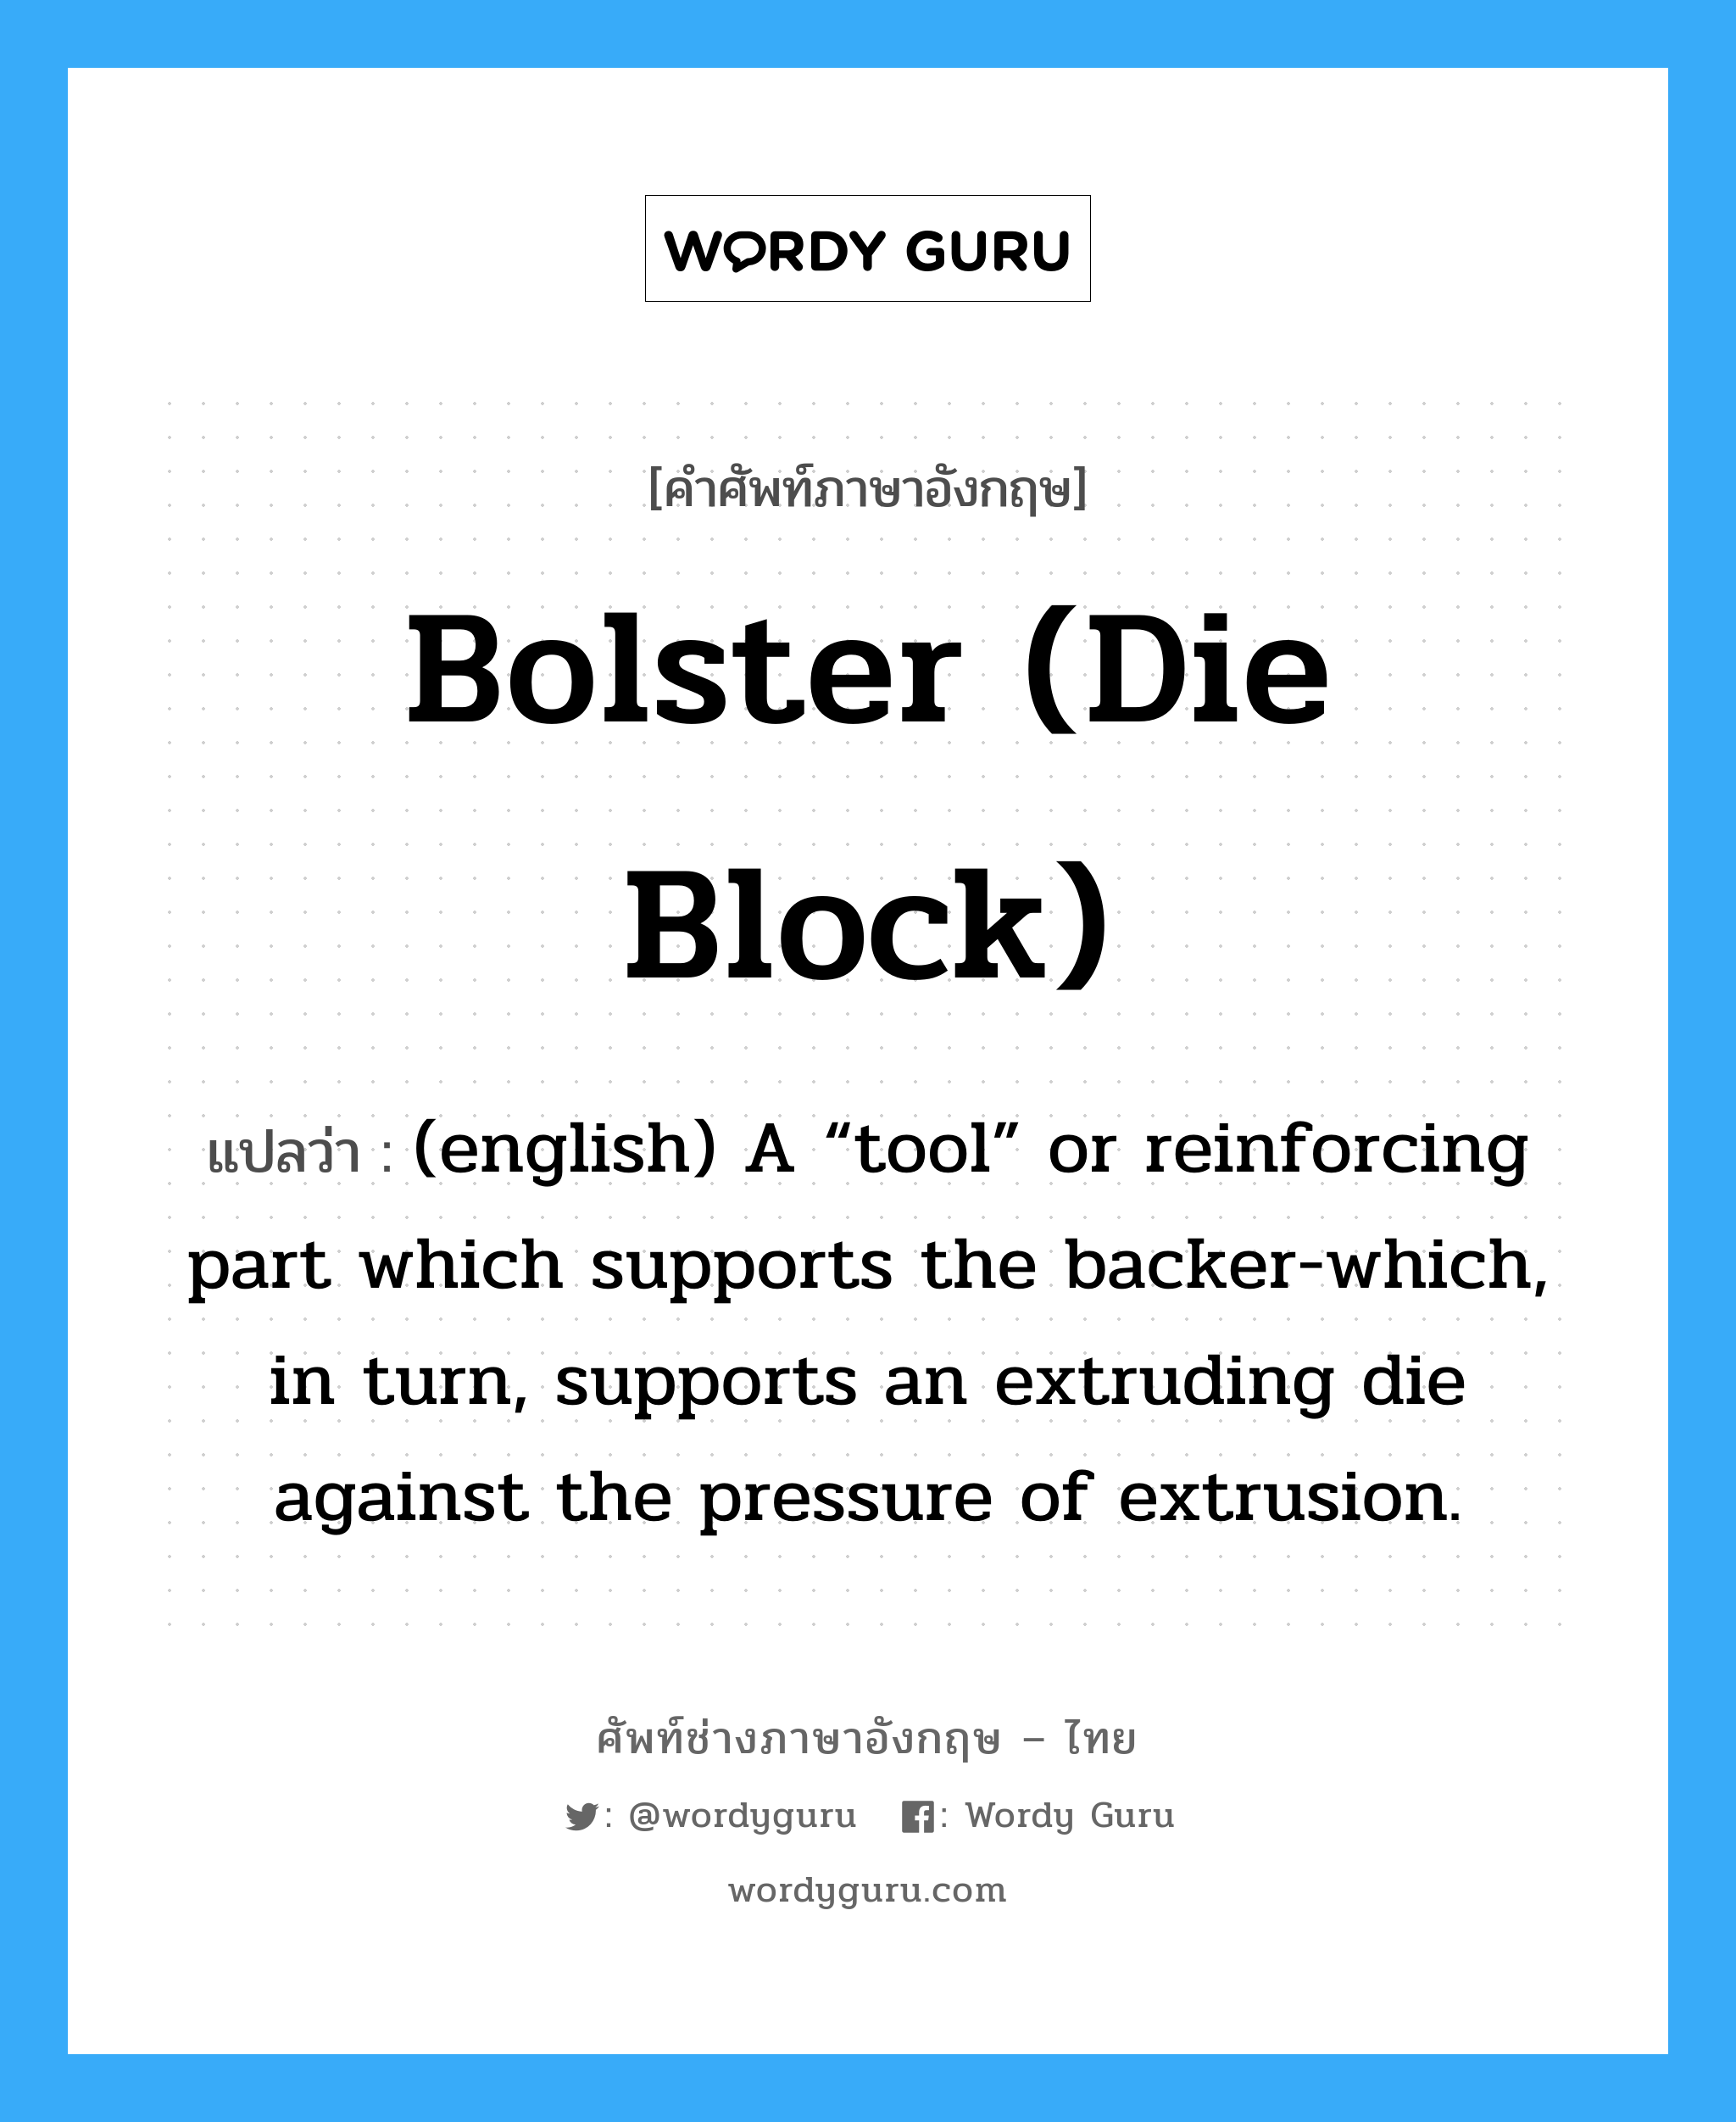 Bolster (die block) แปลว่า?, คำศัพท์ช่างภาษาอังกฤษ - ไทย Bolster (die block) คำศัพท์ภาษาอังกฤษ Bolster (die block) แปลว่า (english) A “tool” or reinforcing part which supports the backer-which, in turn, supports an extruding die against the pressure of extrusion.